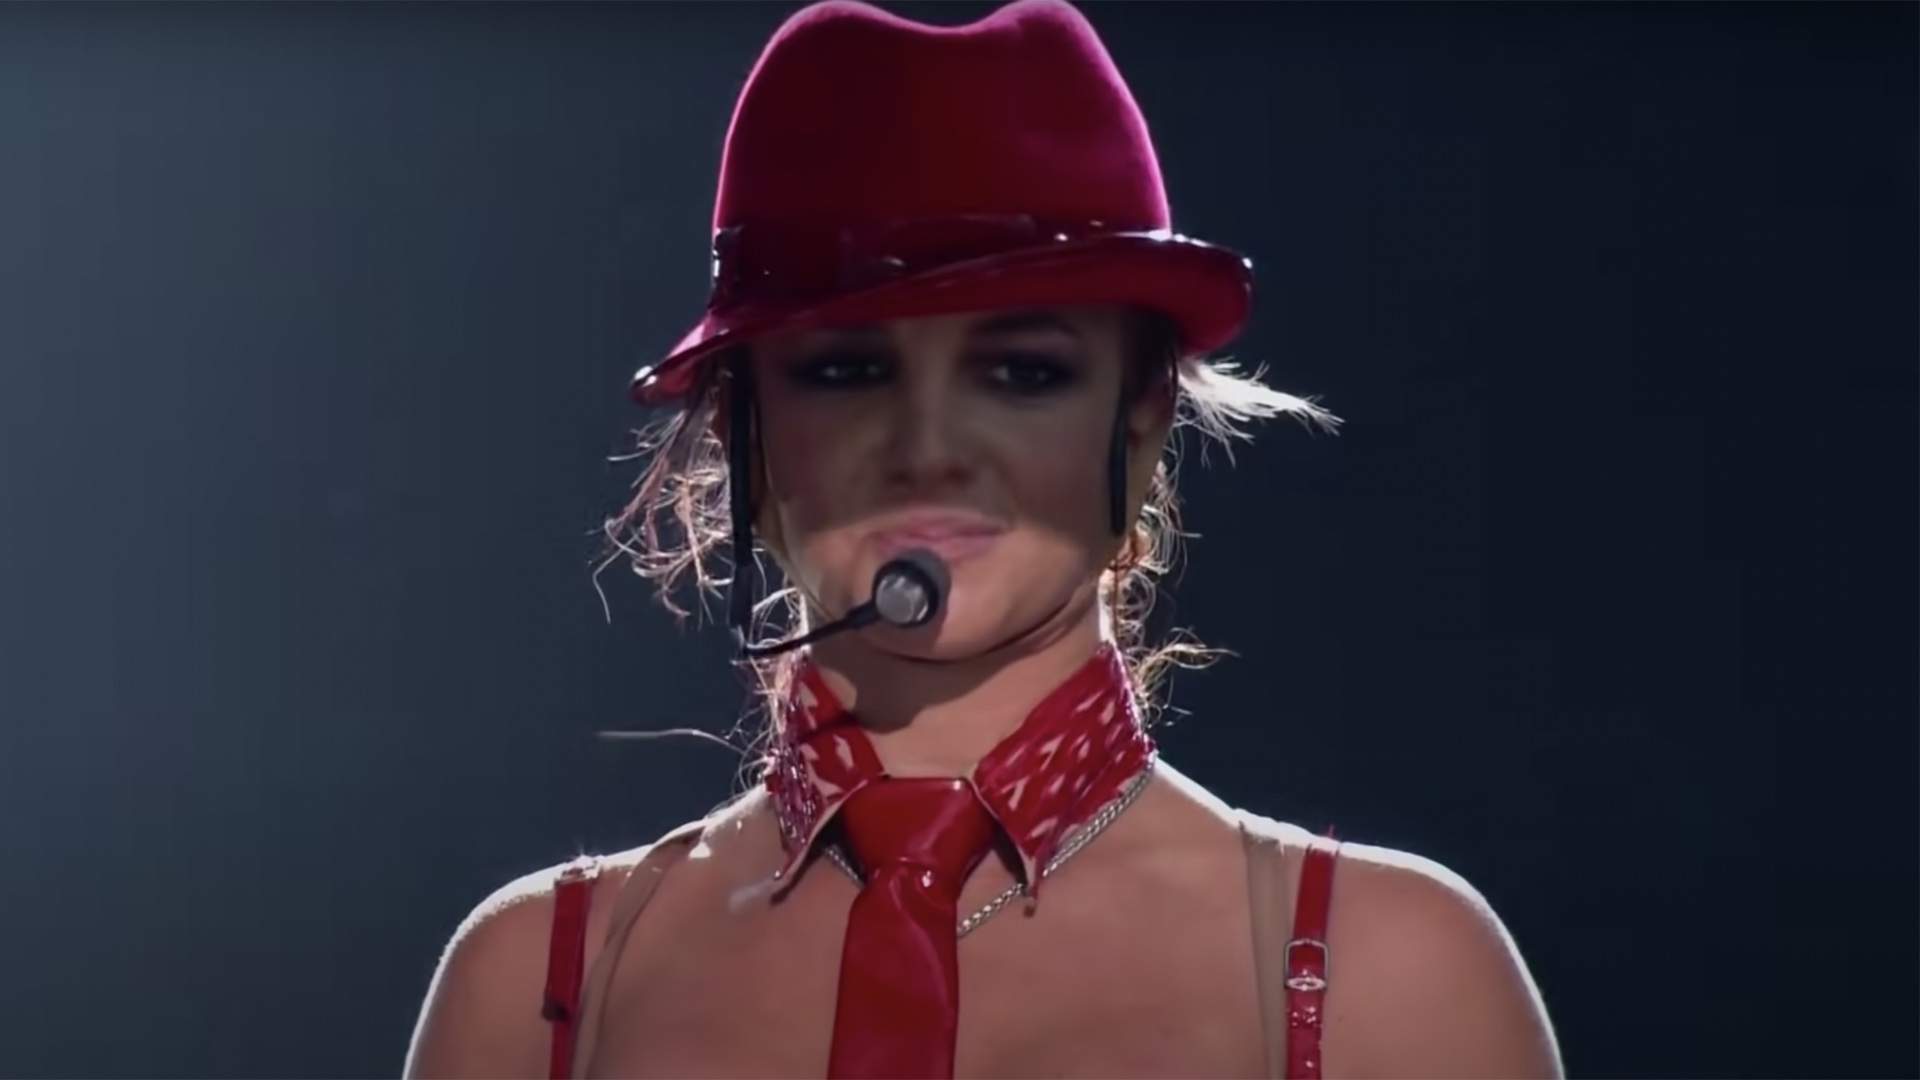 Here's the Trailer for the New 'Britney vs Spears' Documentary That's Hitting Netflix Next Week